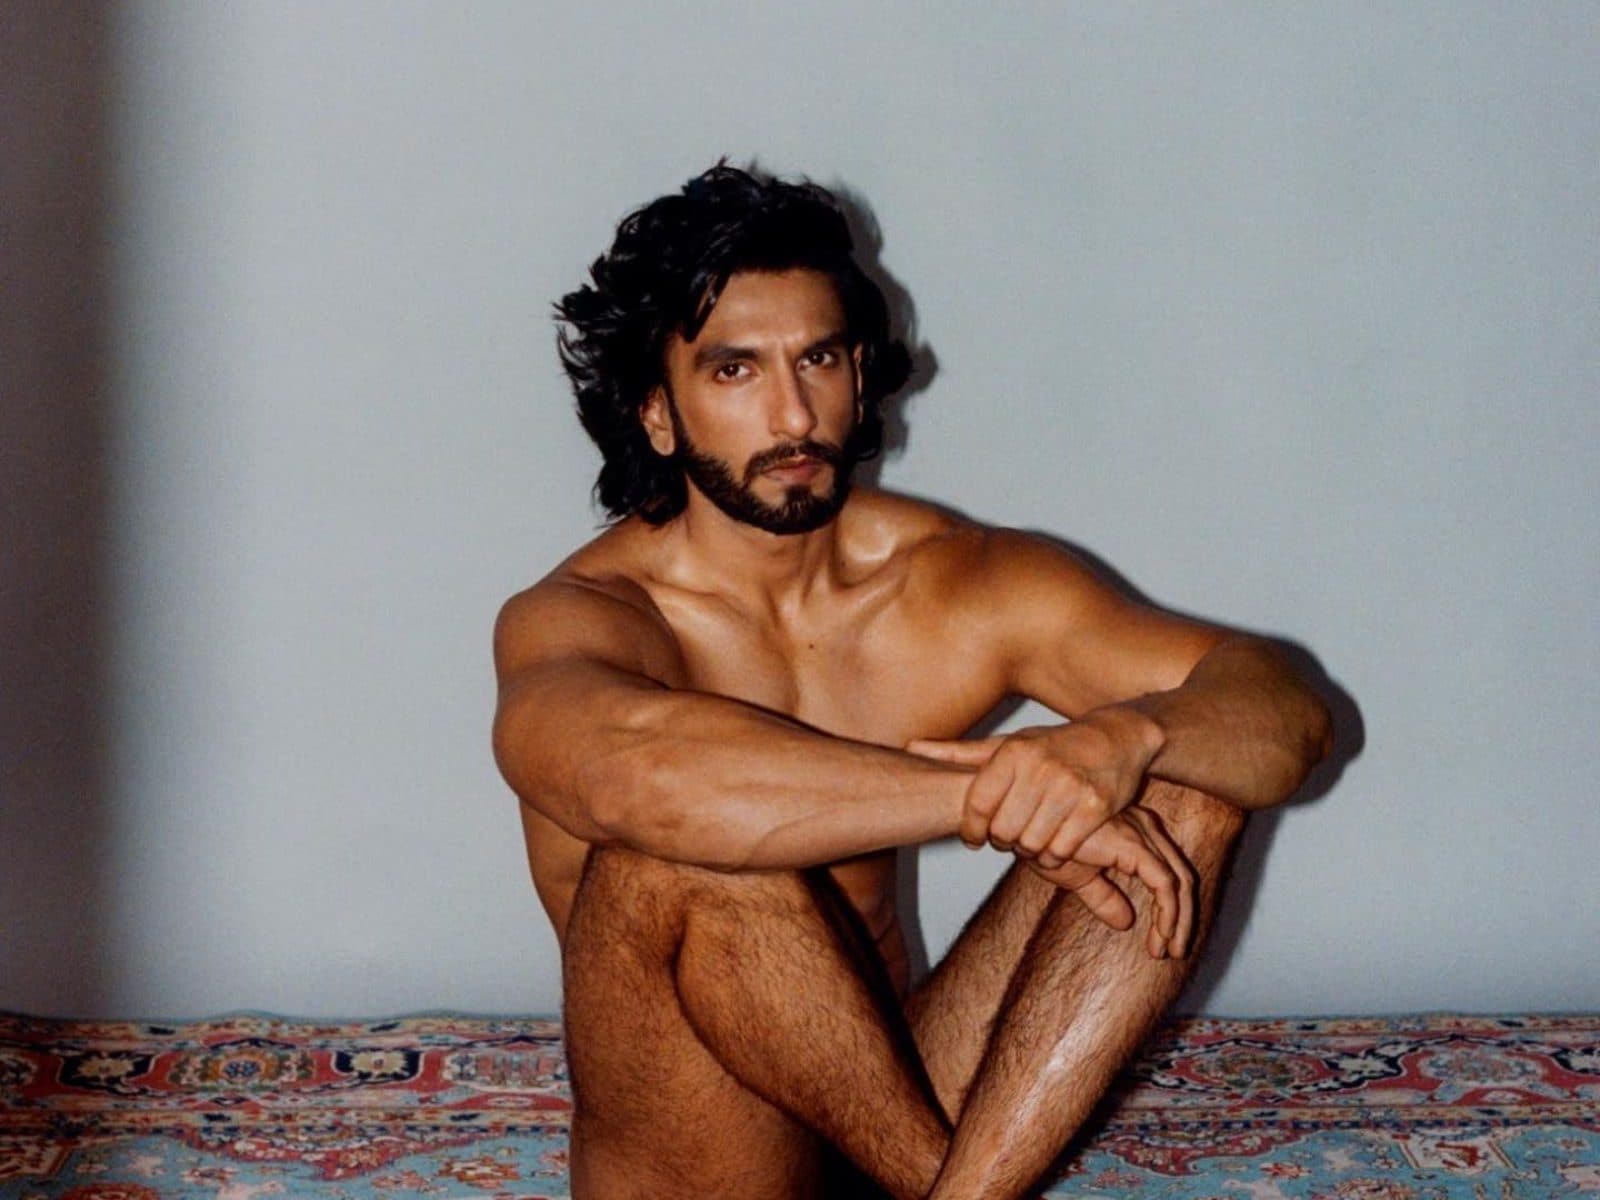 BuzzFix: Why Ranveer Singh's Masculinity Redefining Nude Shoot Does Not  Insult Women's Modesty